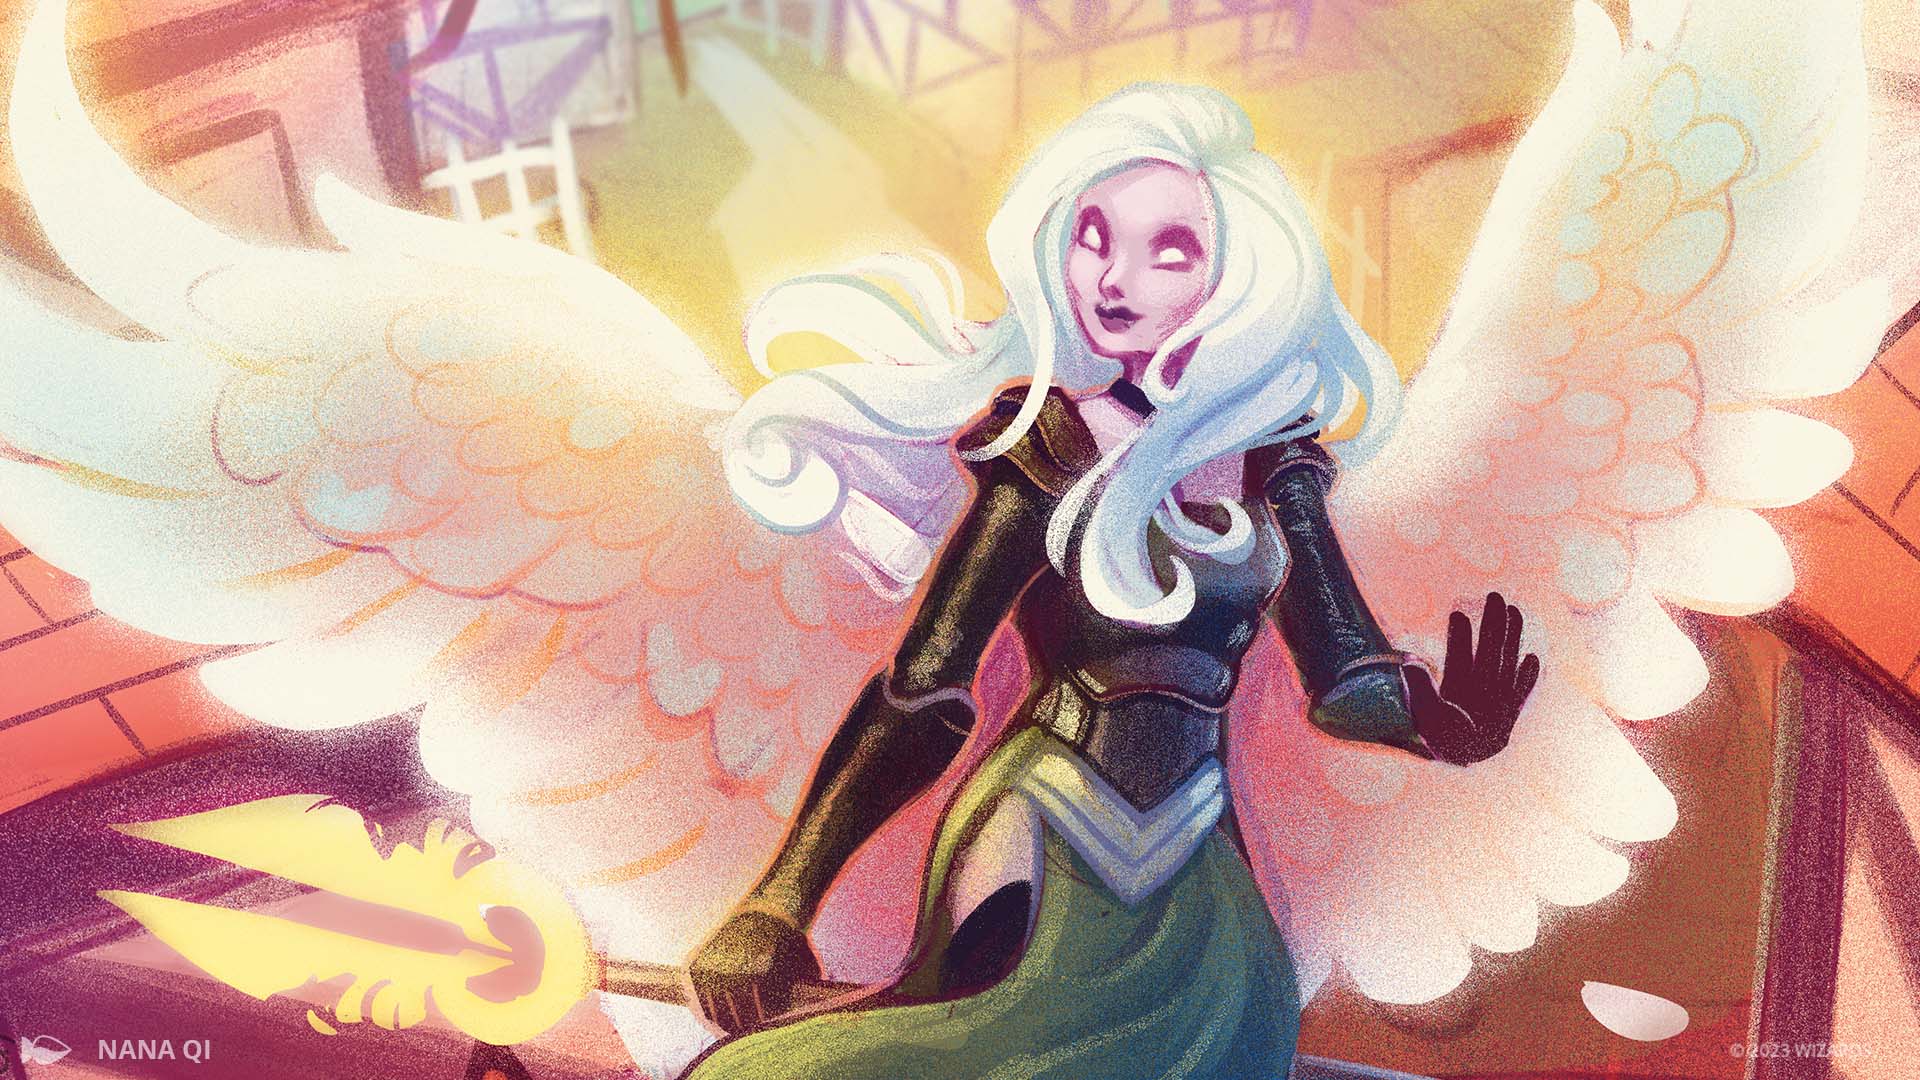 Archangel Avacyn artwork by Nana Qi for the Secret Lair Drop, From Cute to Brute